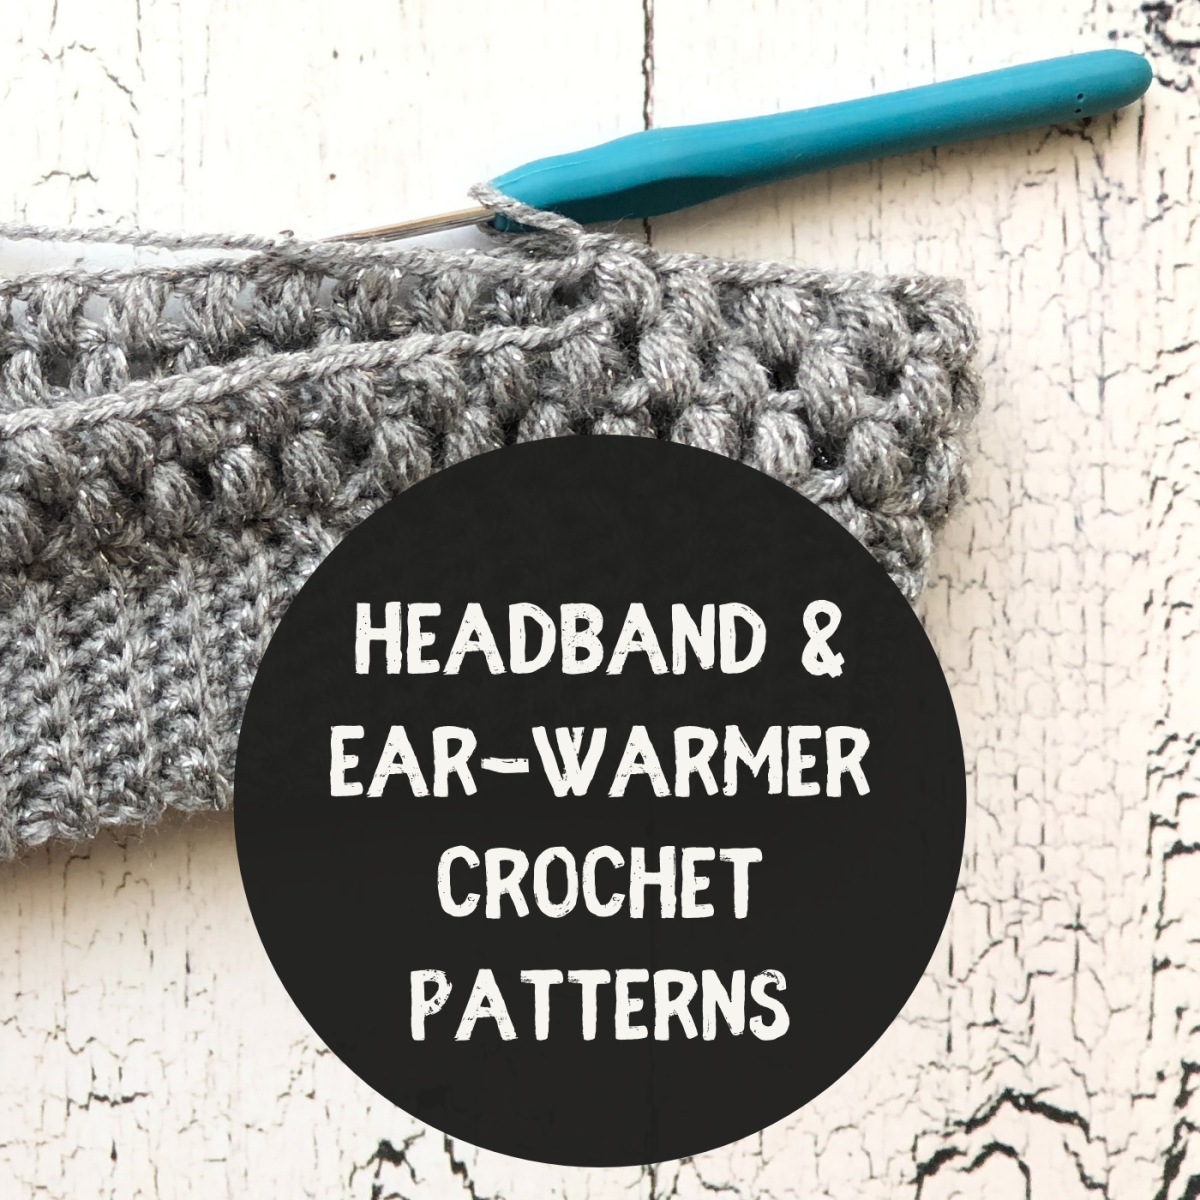 Find loads of easy, pretty patterns to keep your ears warm in the cold weather!